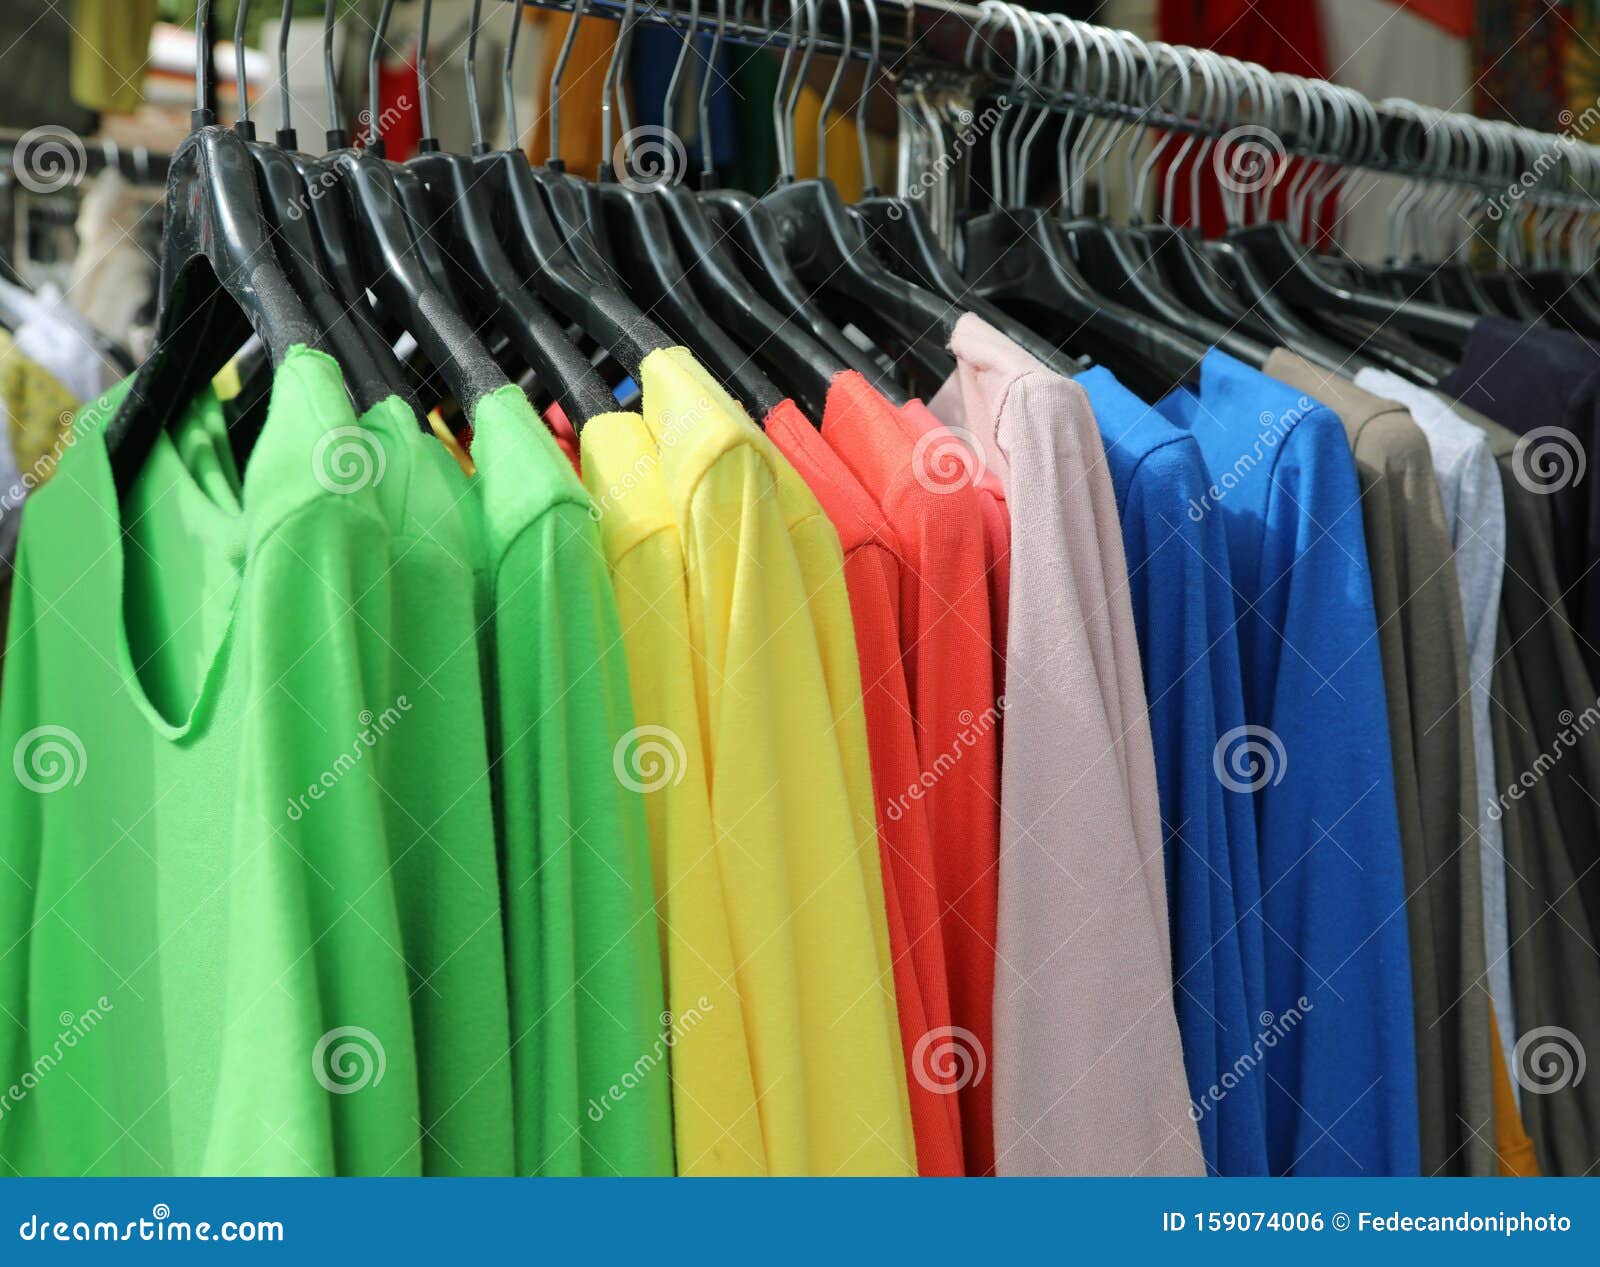 Colorful Shirts Hanging on the Hanger for Sale in the Shop Stock Photo ...